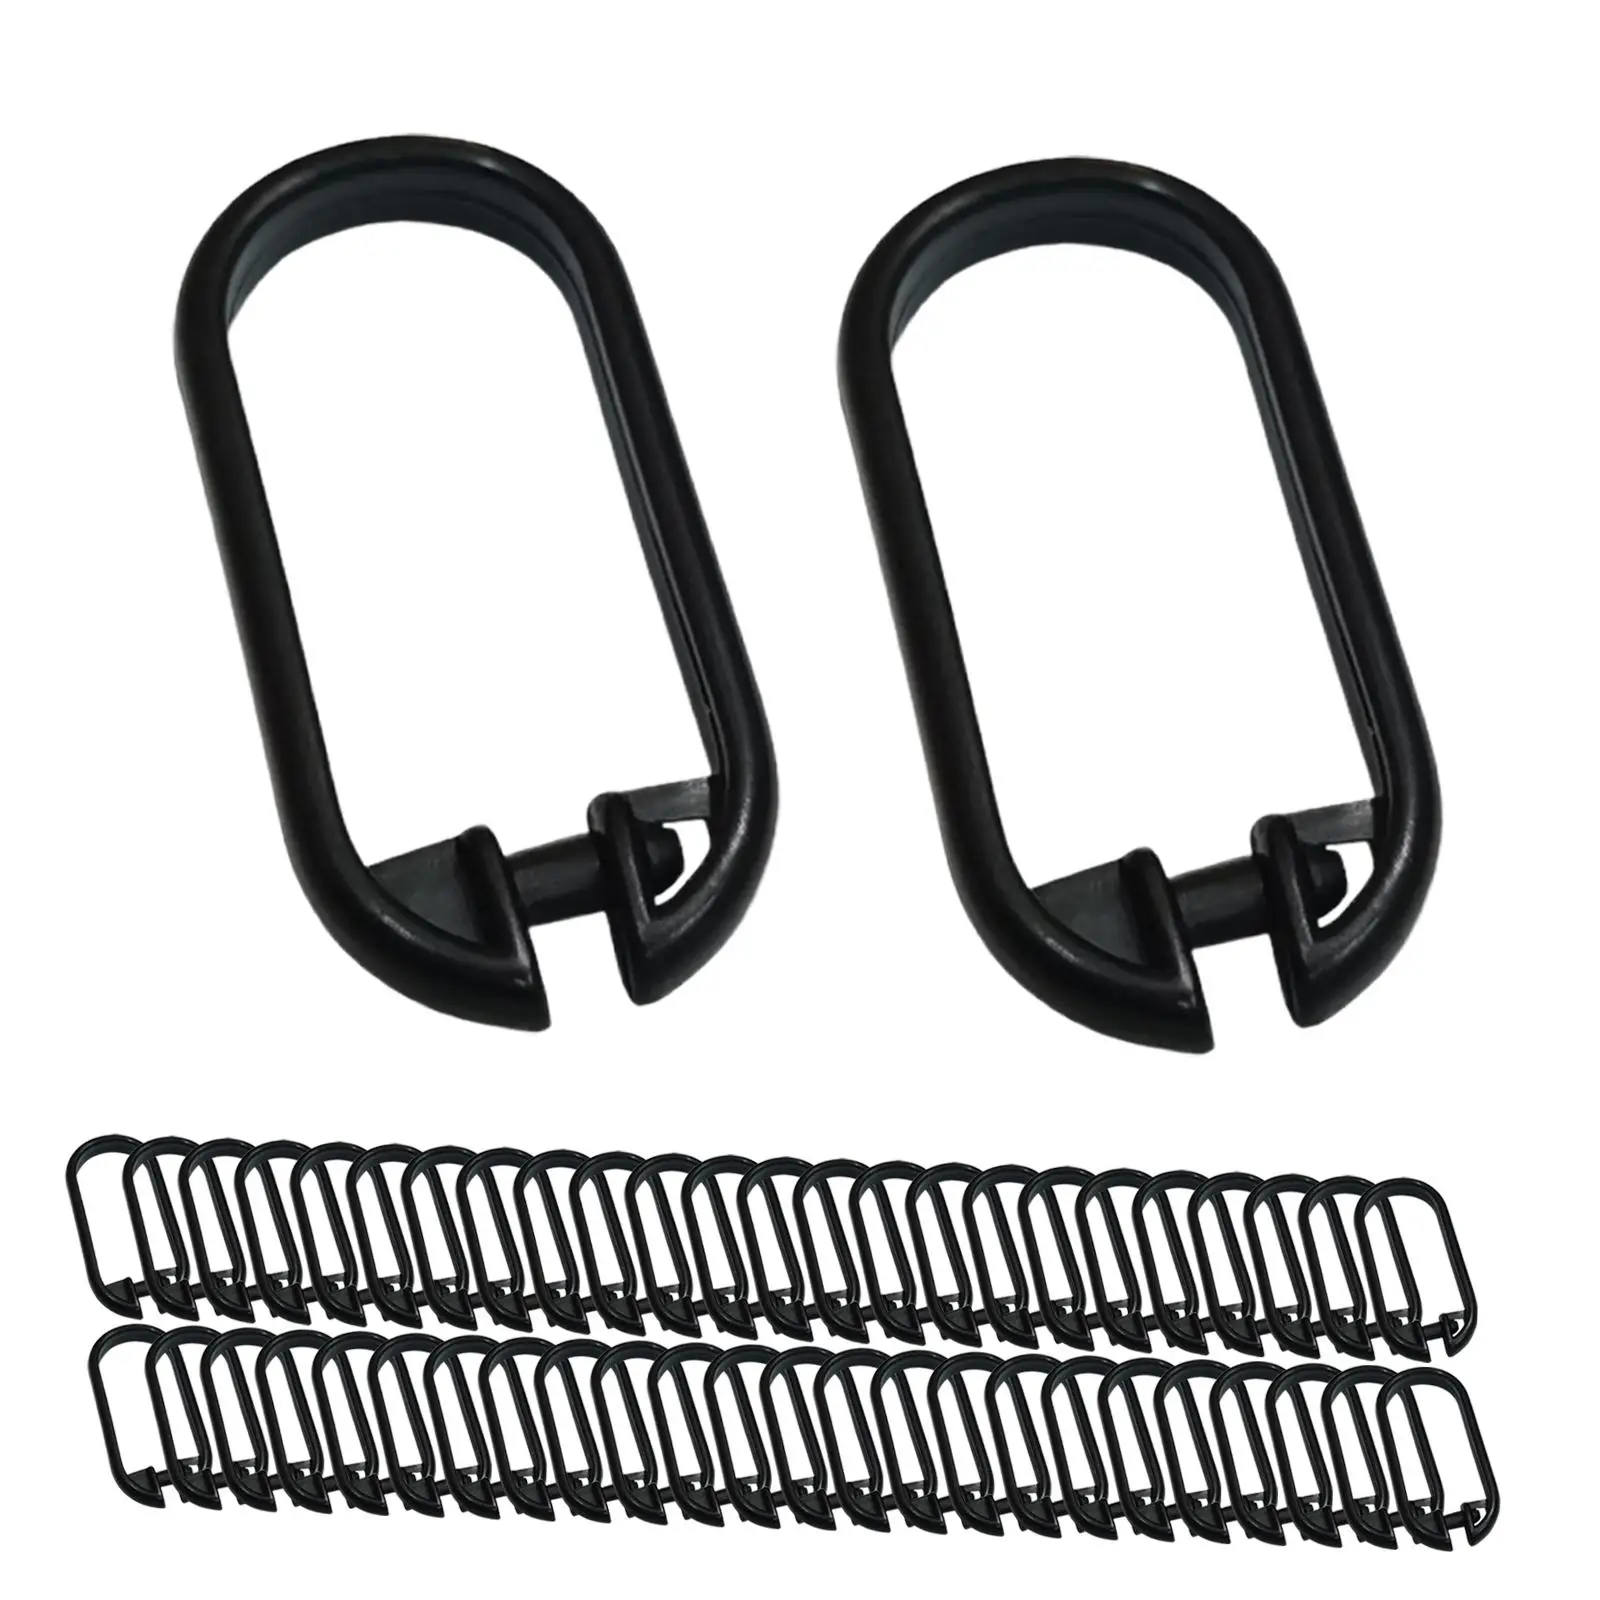 50x Portable Curtain Loop Buckle Direct Replaces Multifunctional Curtain Hanging Loop Buckle for Bathroom Home Shower Accessory